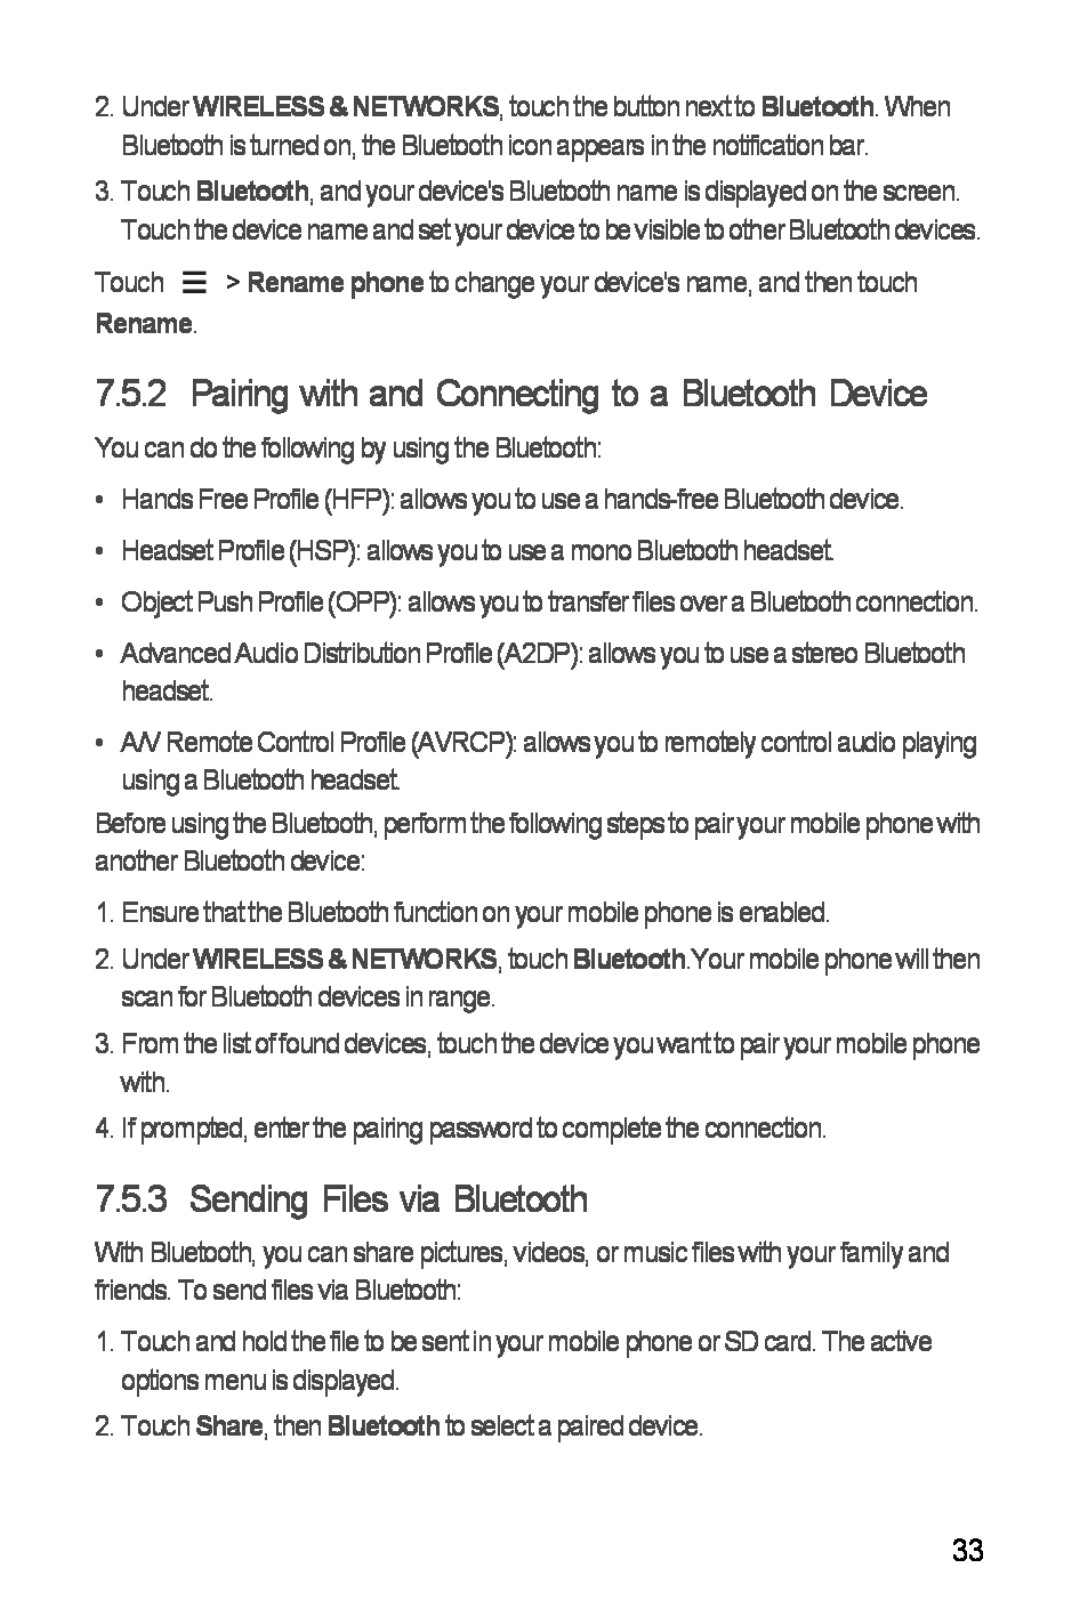 Huawei H881C manual Pairing with and Connecting to a Bluetooth Device, Sending Files via Bluetooth, Rename 